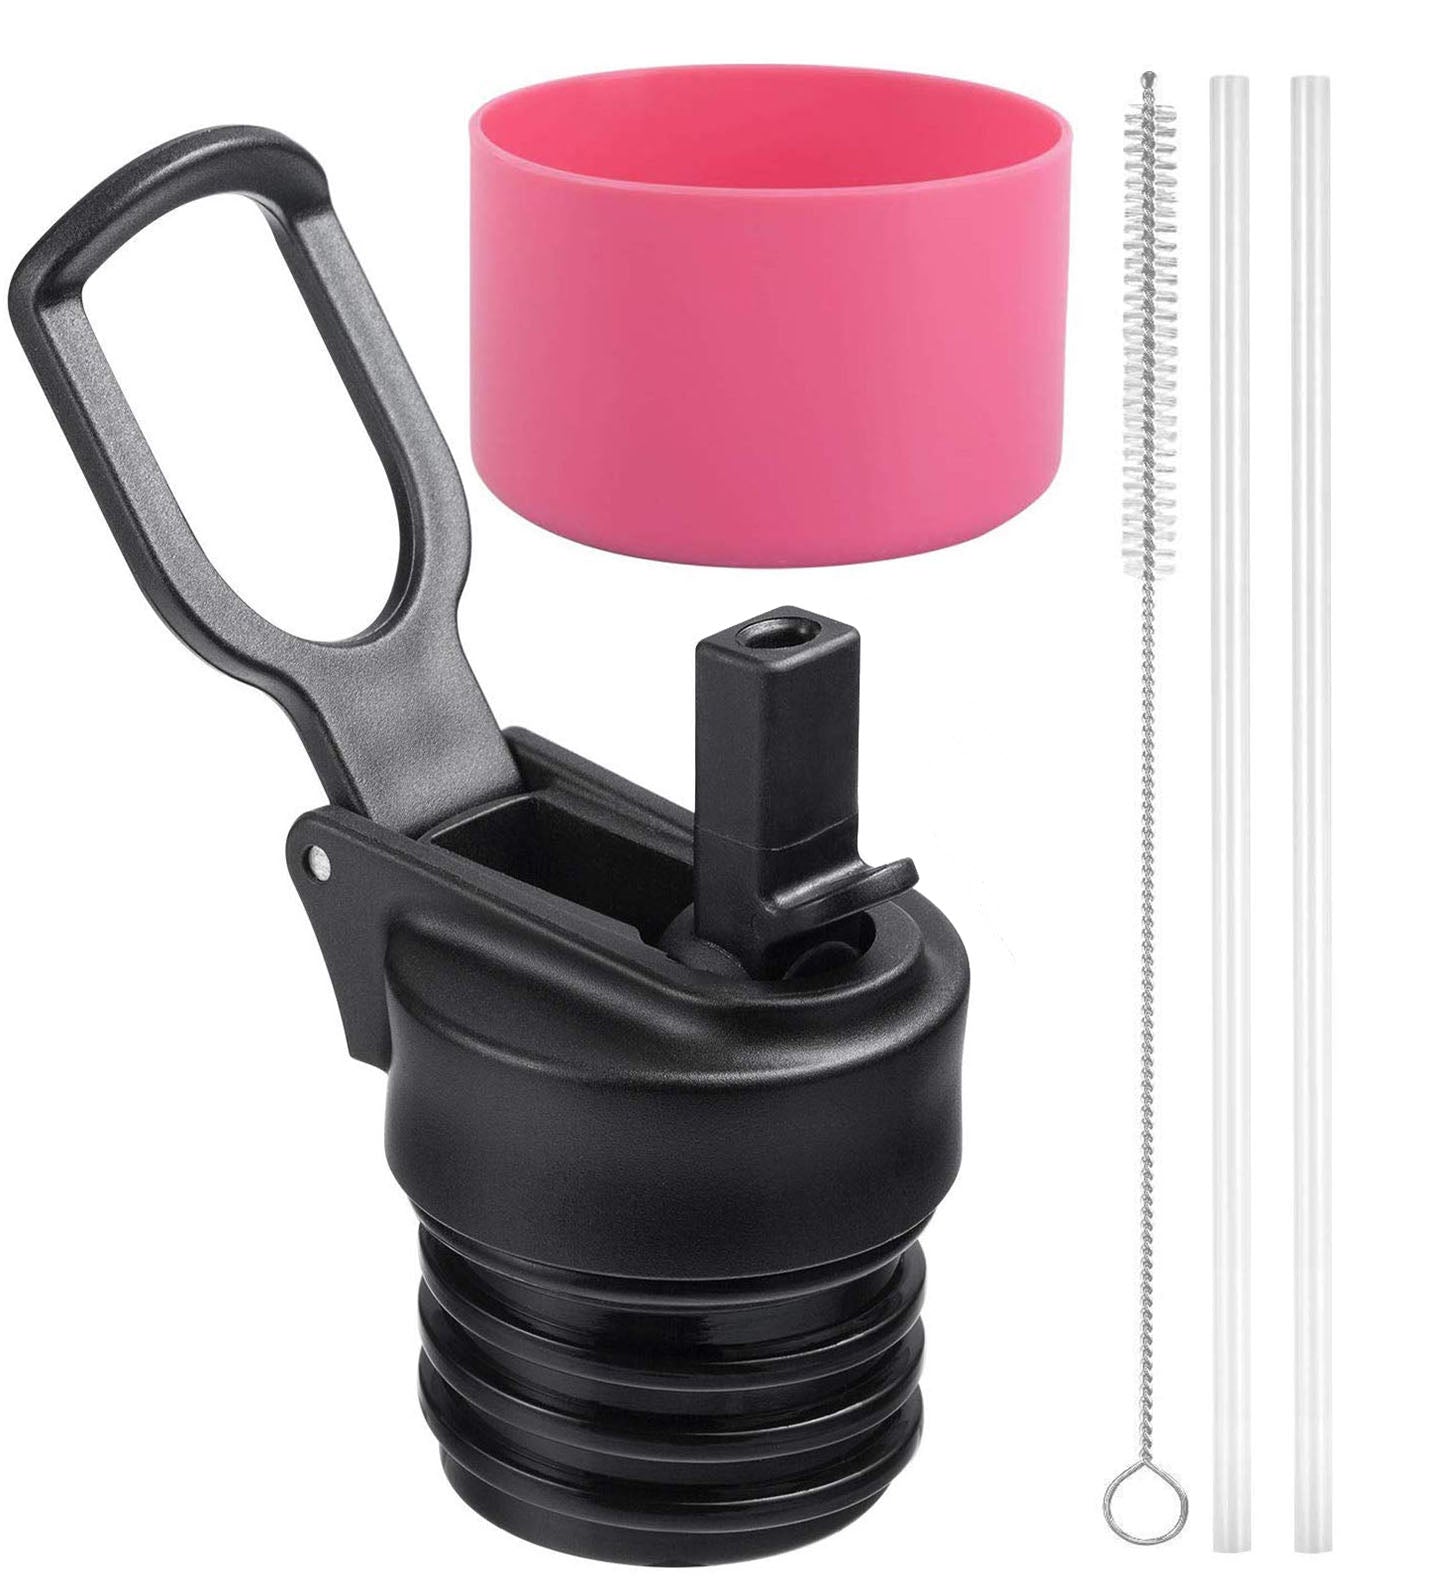 Straw Lid & Silicone Flex Boot Set, For Hydro Flask Standard Mouth